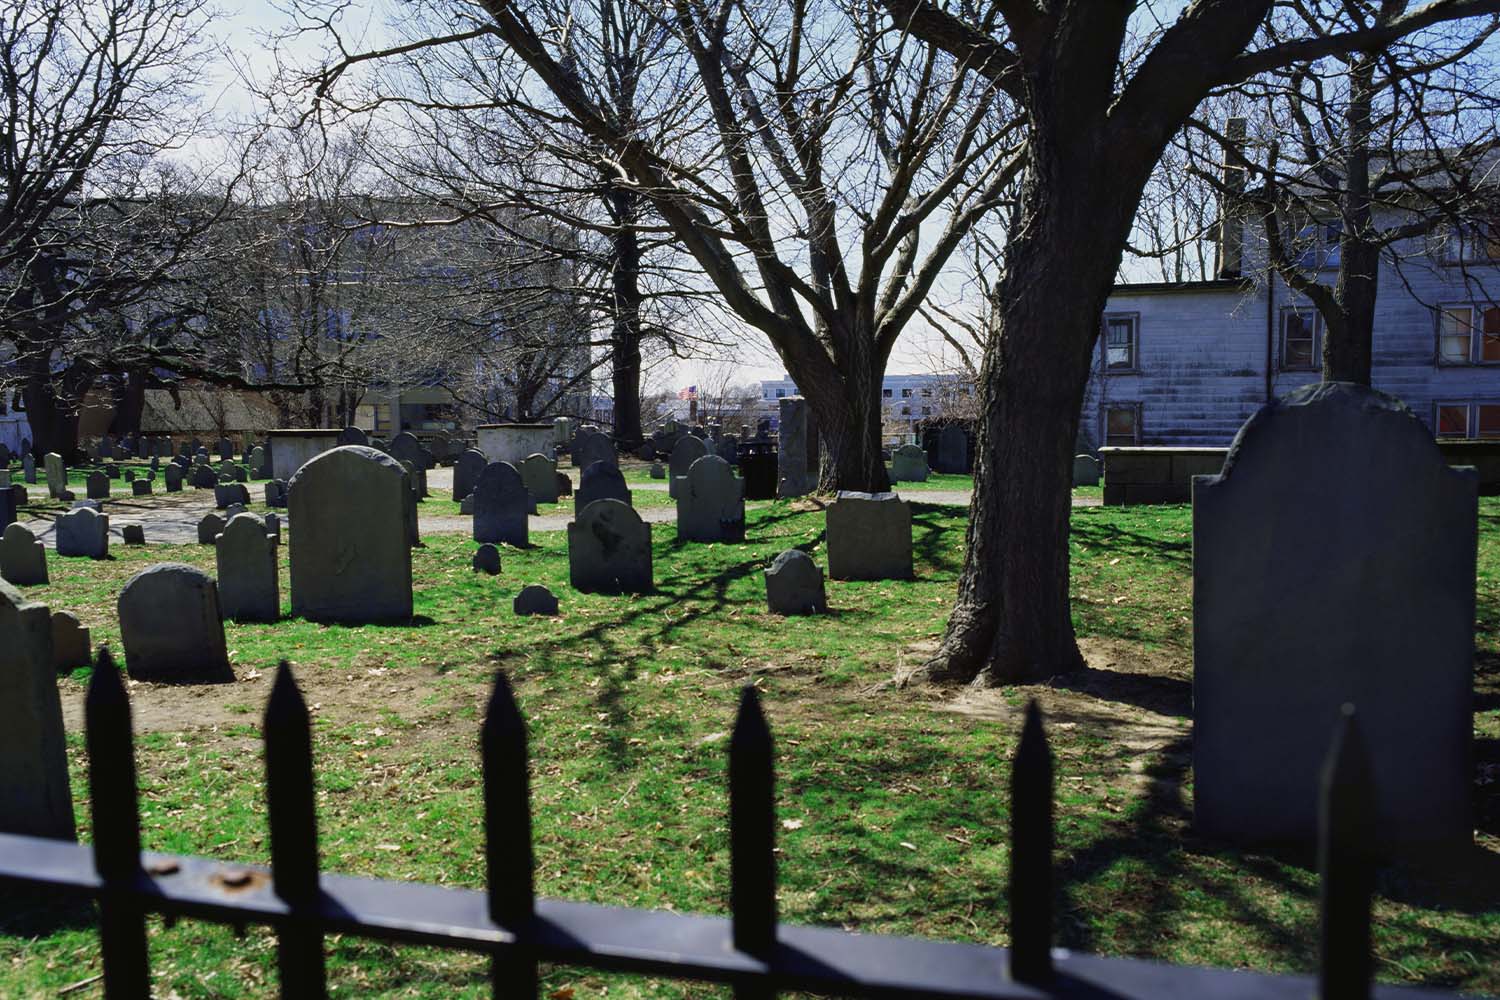 The Charter Street Cemetery